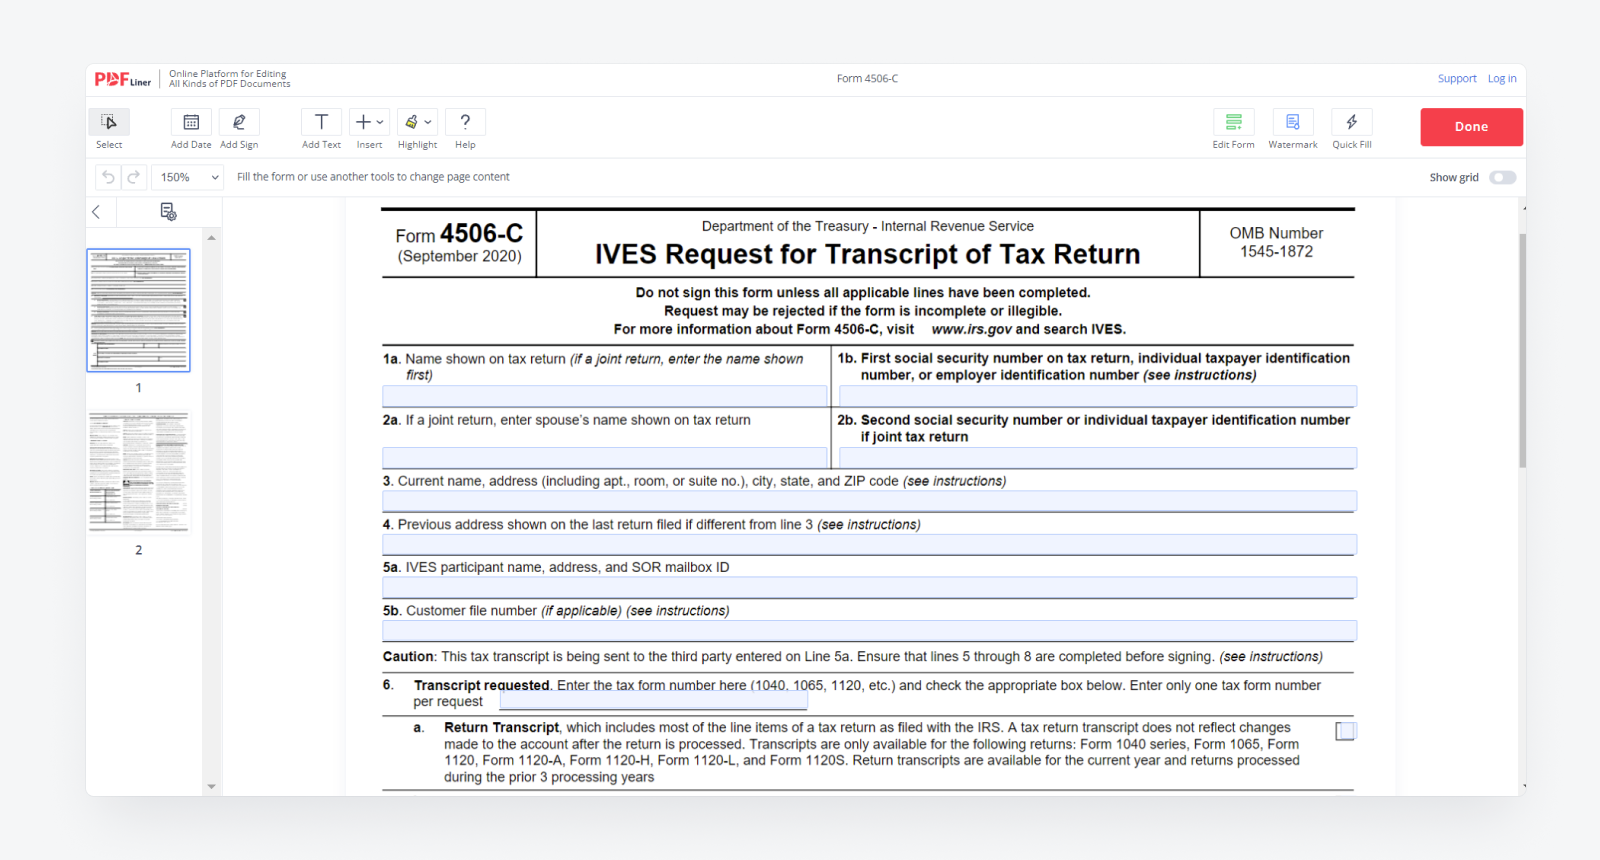 How To Fill Out Form 4506 C Tips On IRS Tax Form 4506 C Completion